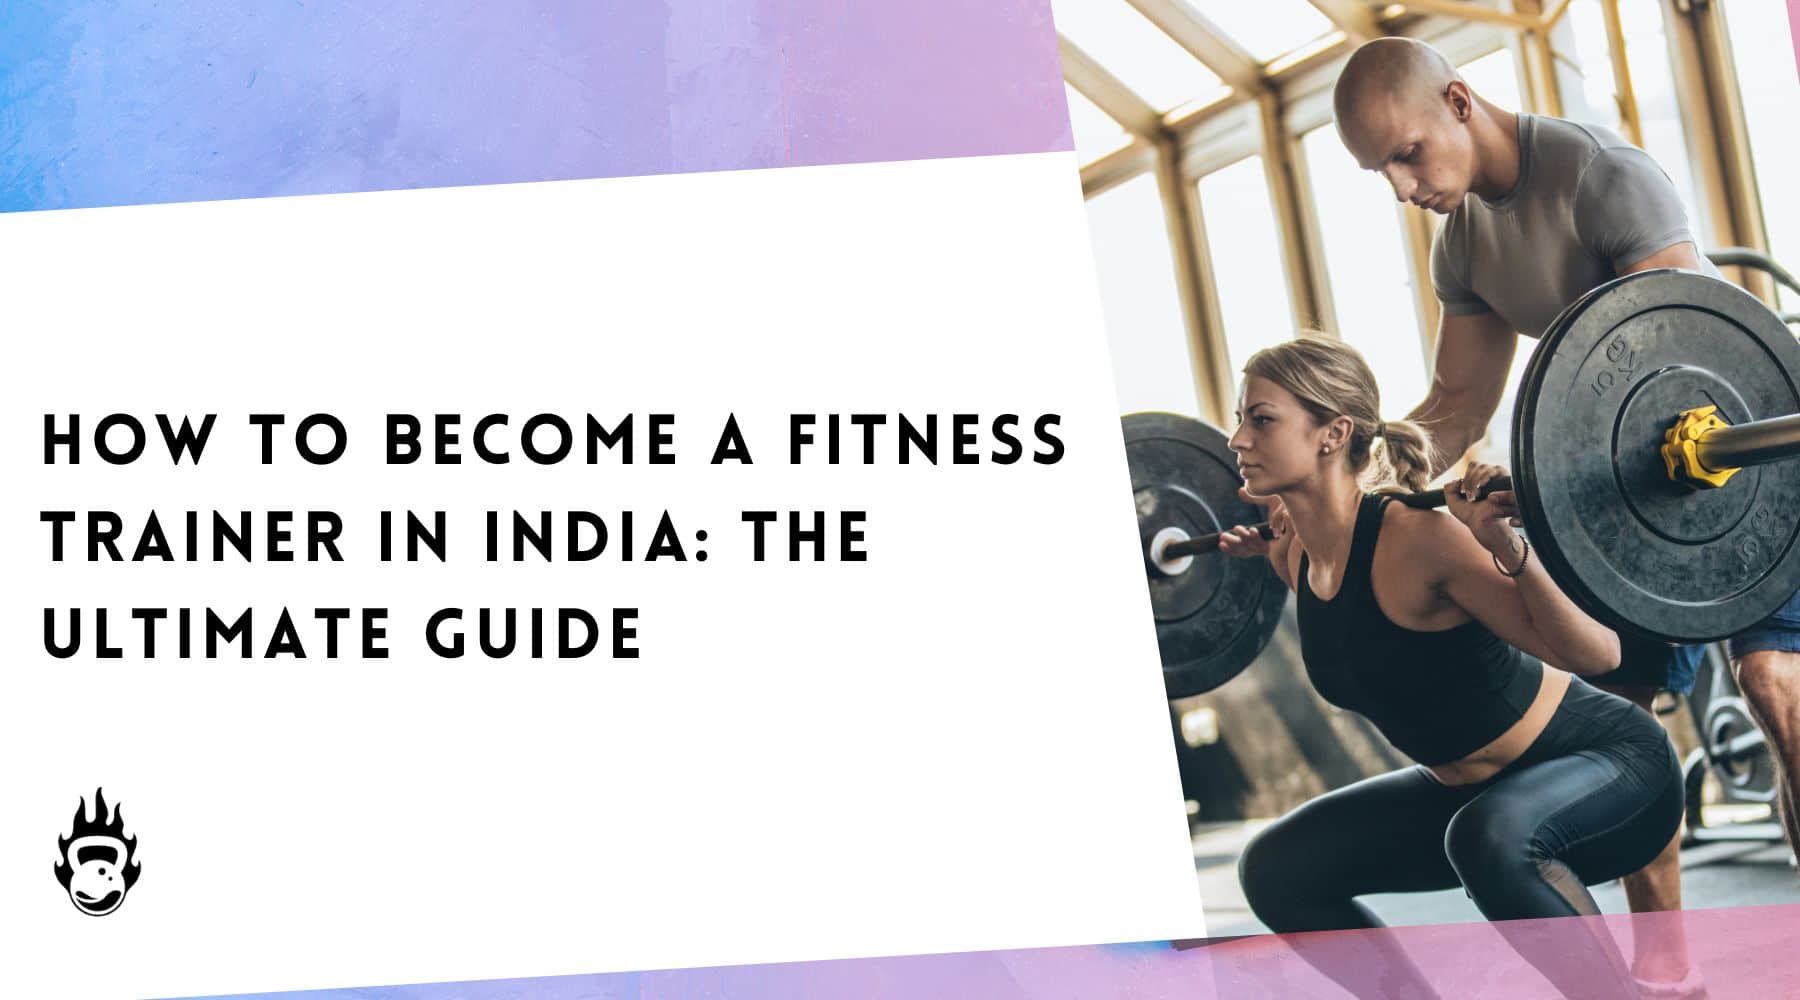 How To Become A Fitness Trainer In India: The Ultimate Guide